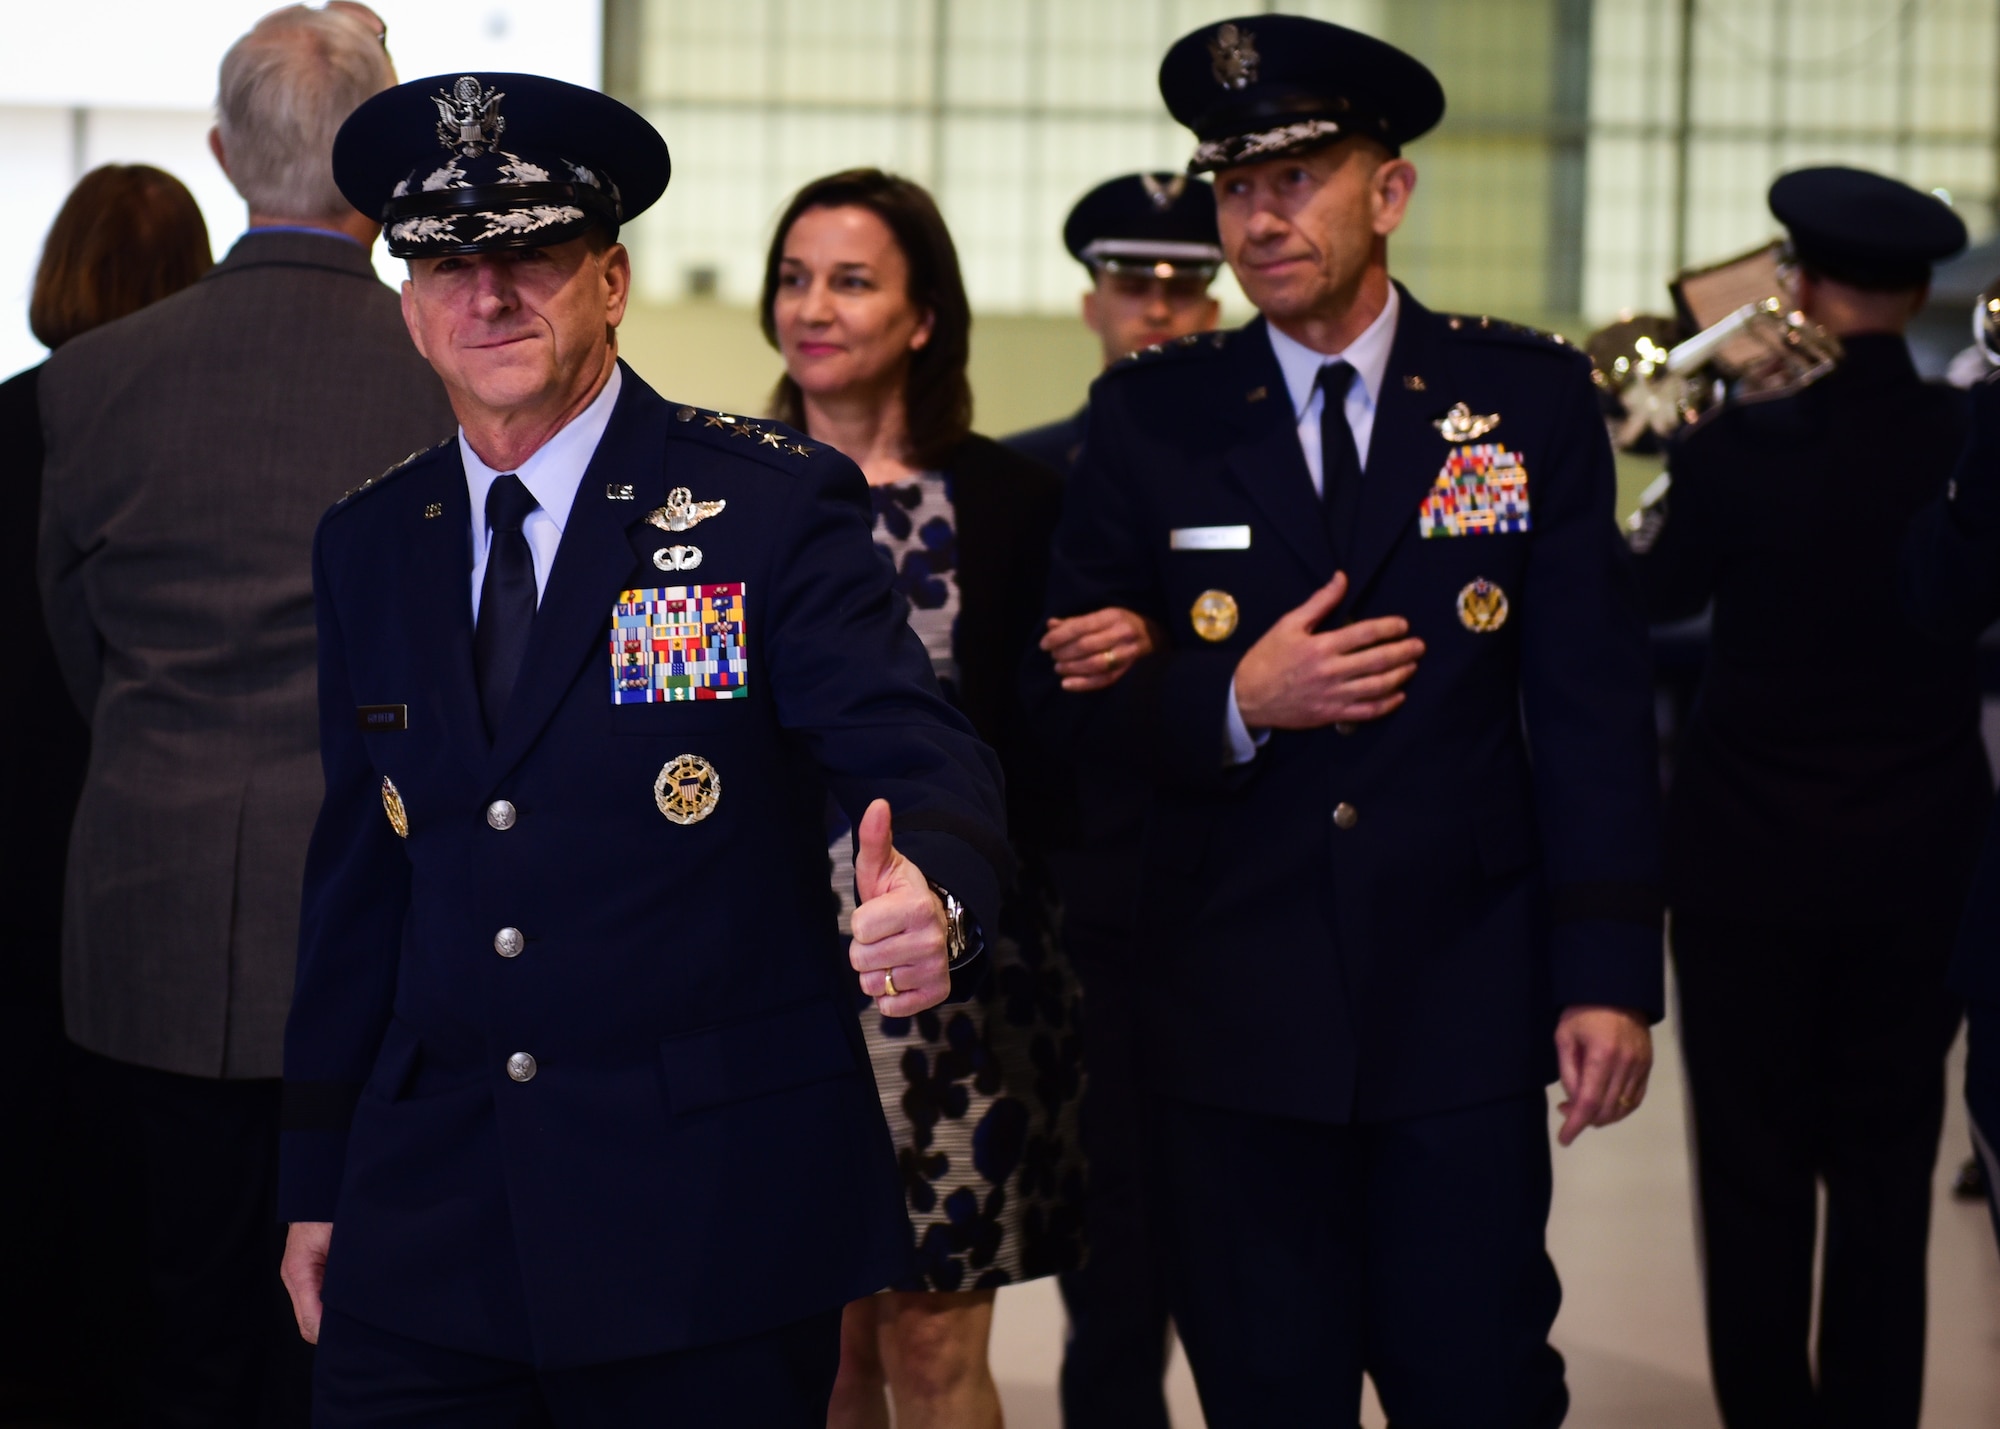 U.S. Air Force Chief of Staff Gen. David L. gives the thumbs up during ACC’s Change of Command ceremony at Joint Base Langley-Eustis, Va., March 10, 2017. During the ceremony, Gen. James M. Holmes assumed command from Gen. Herbert “Hawk” Carlisle, who retired after 39 years of service to the Air Force. 